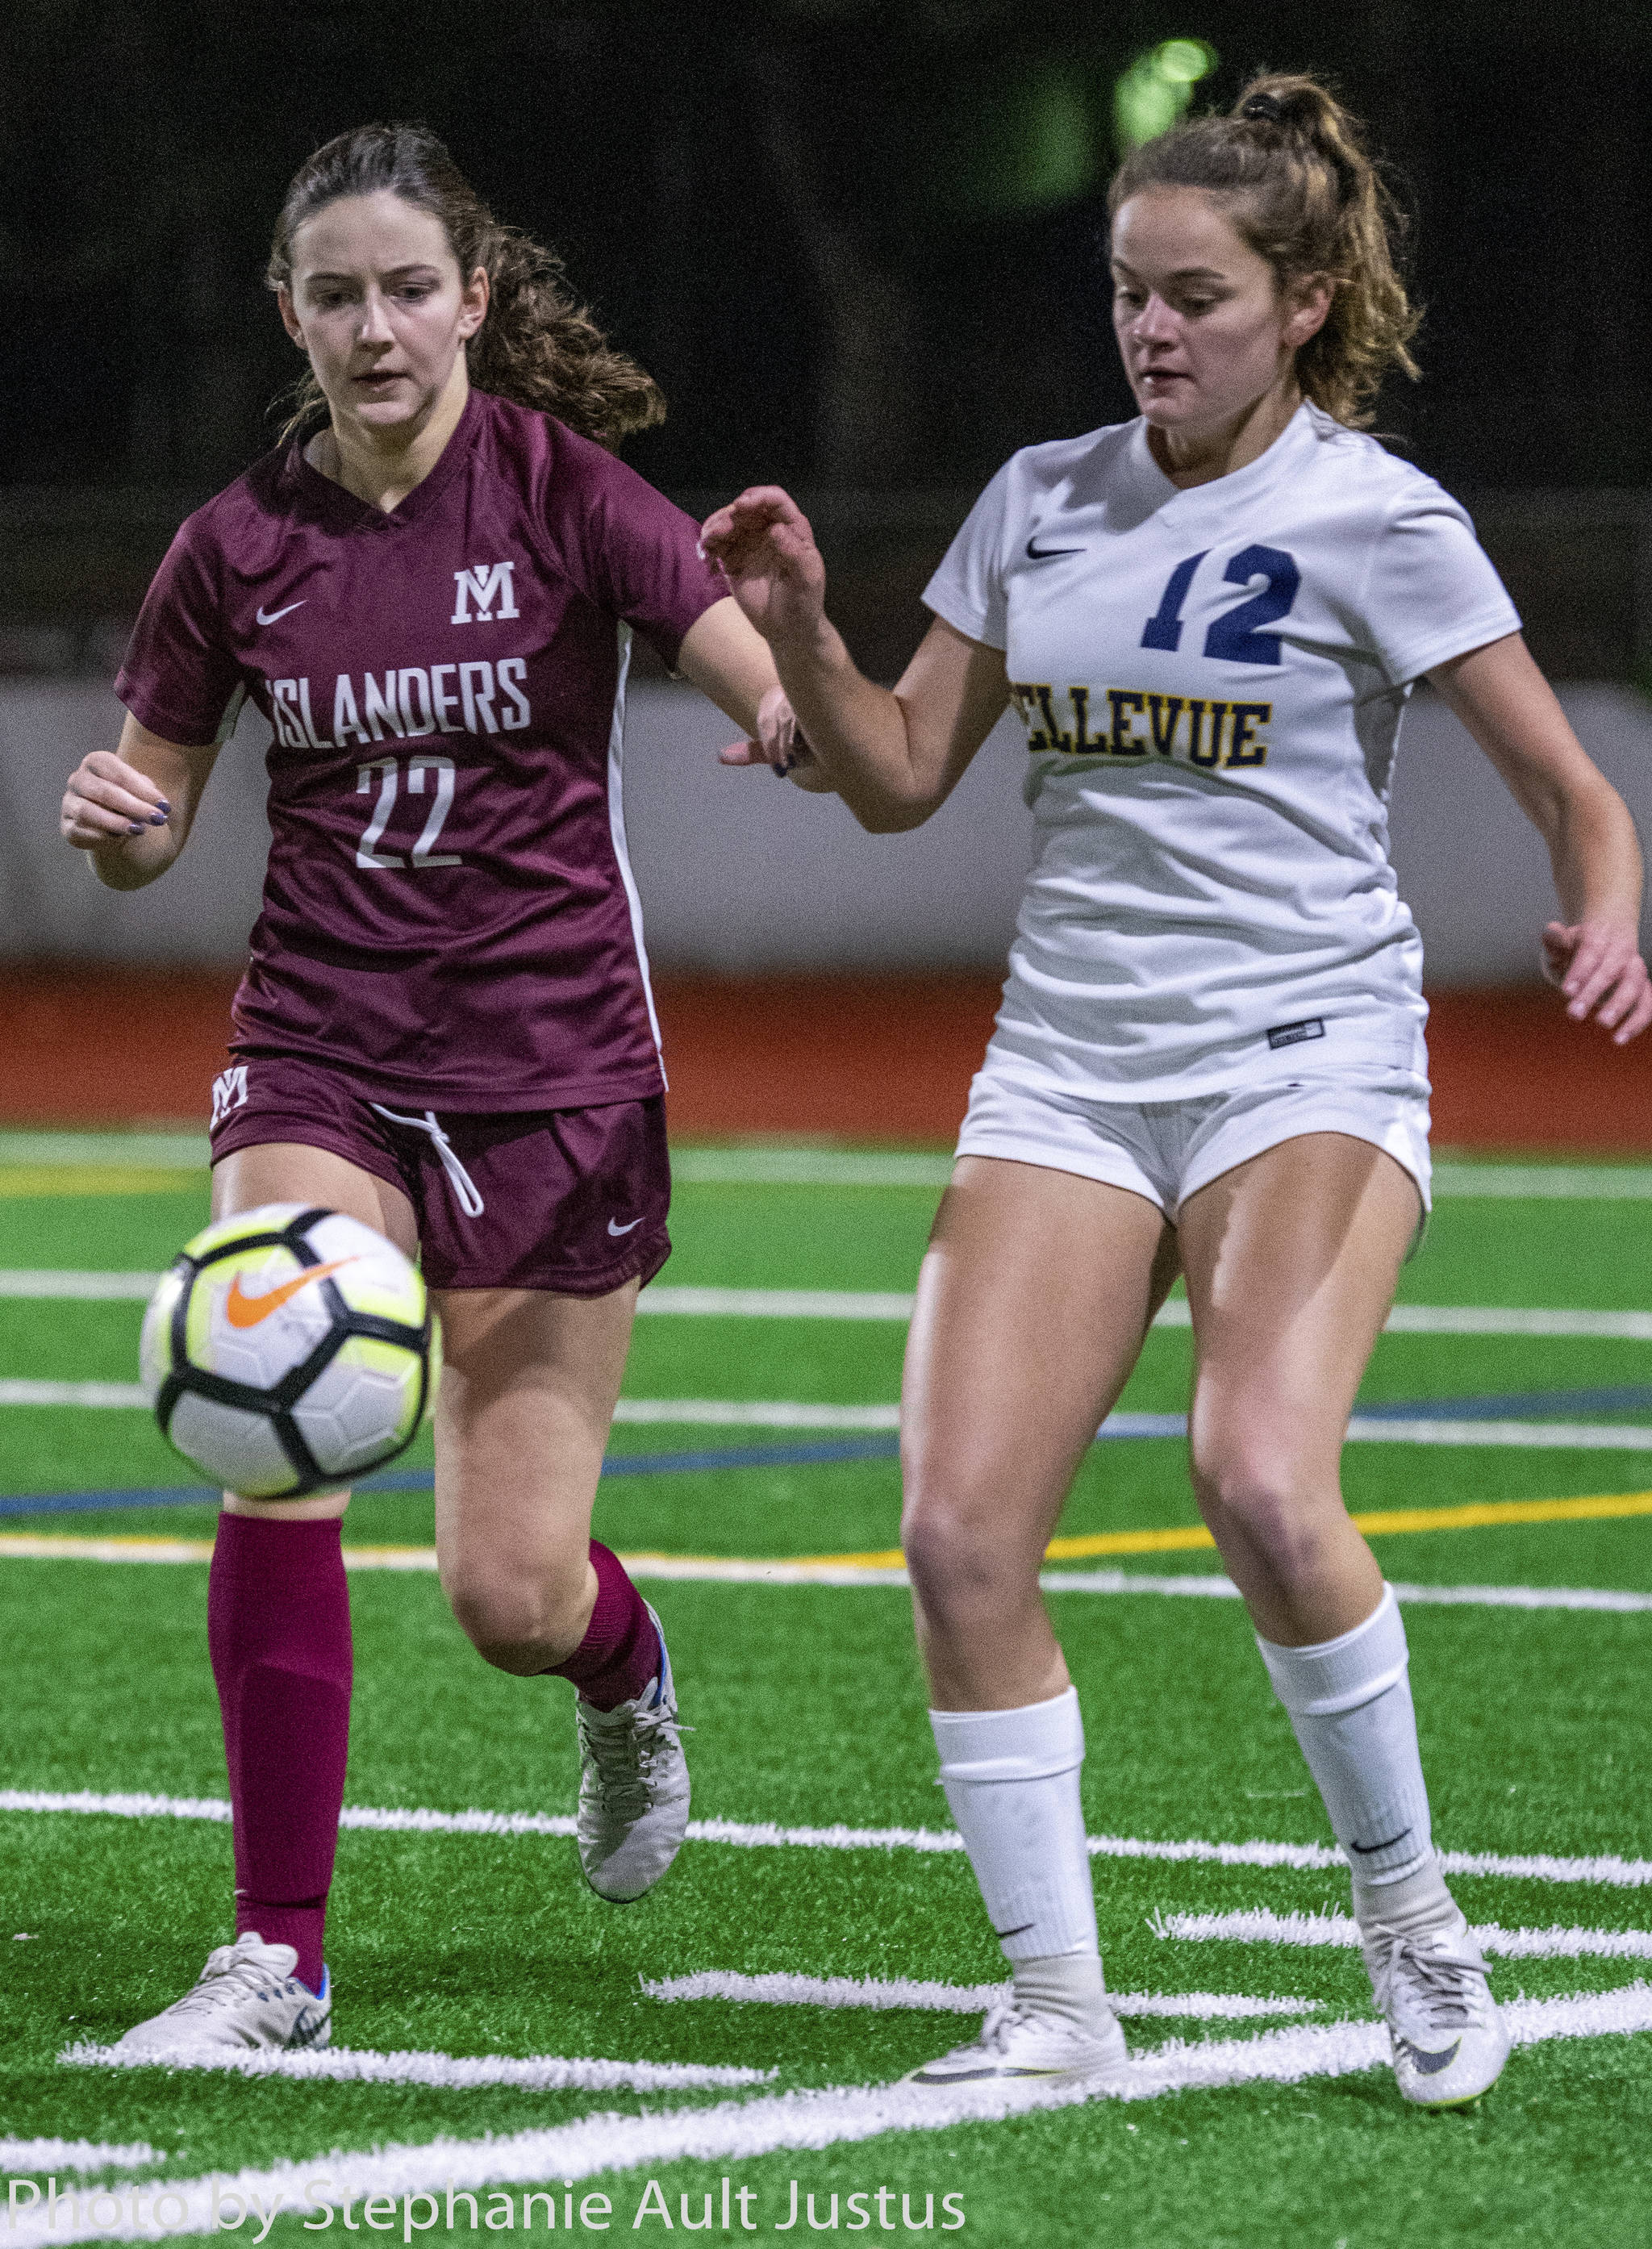 Mercer Island defender Scarlett Counihan (22) and Bellevue midfielder Morgan Pingree (12) both go for the ball during the Wolverines’ 3-0 win on Oct. 31. Photo courtesy of Stephanie Ault Justus